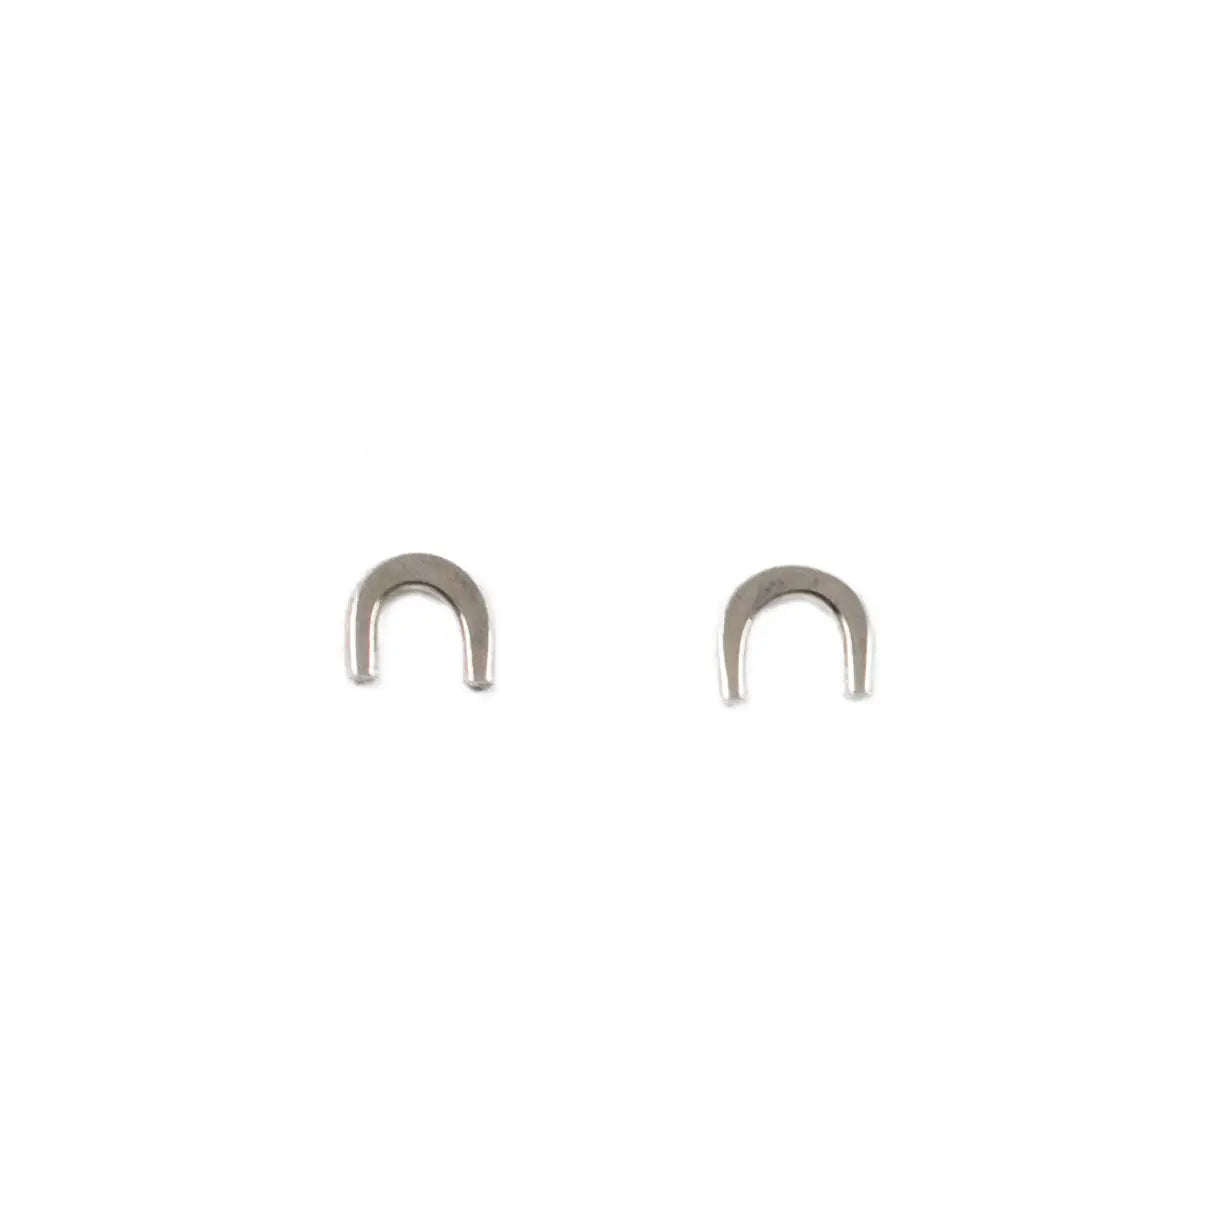 The Sterling Silver Arch Stud Earrings by The Land Of Salt